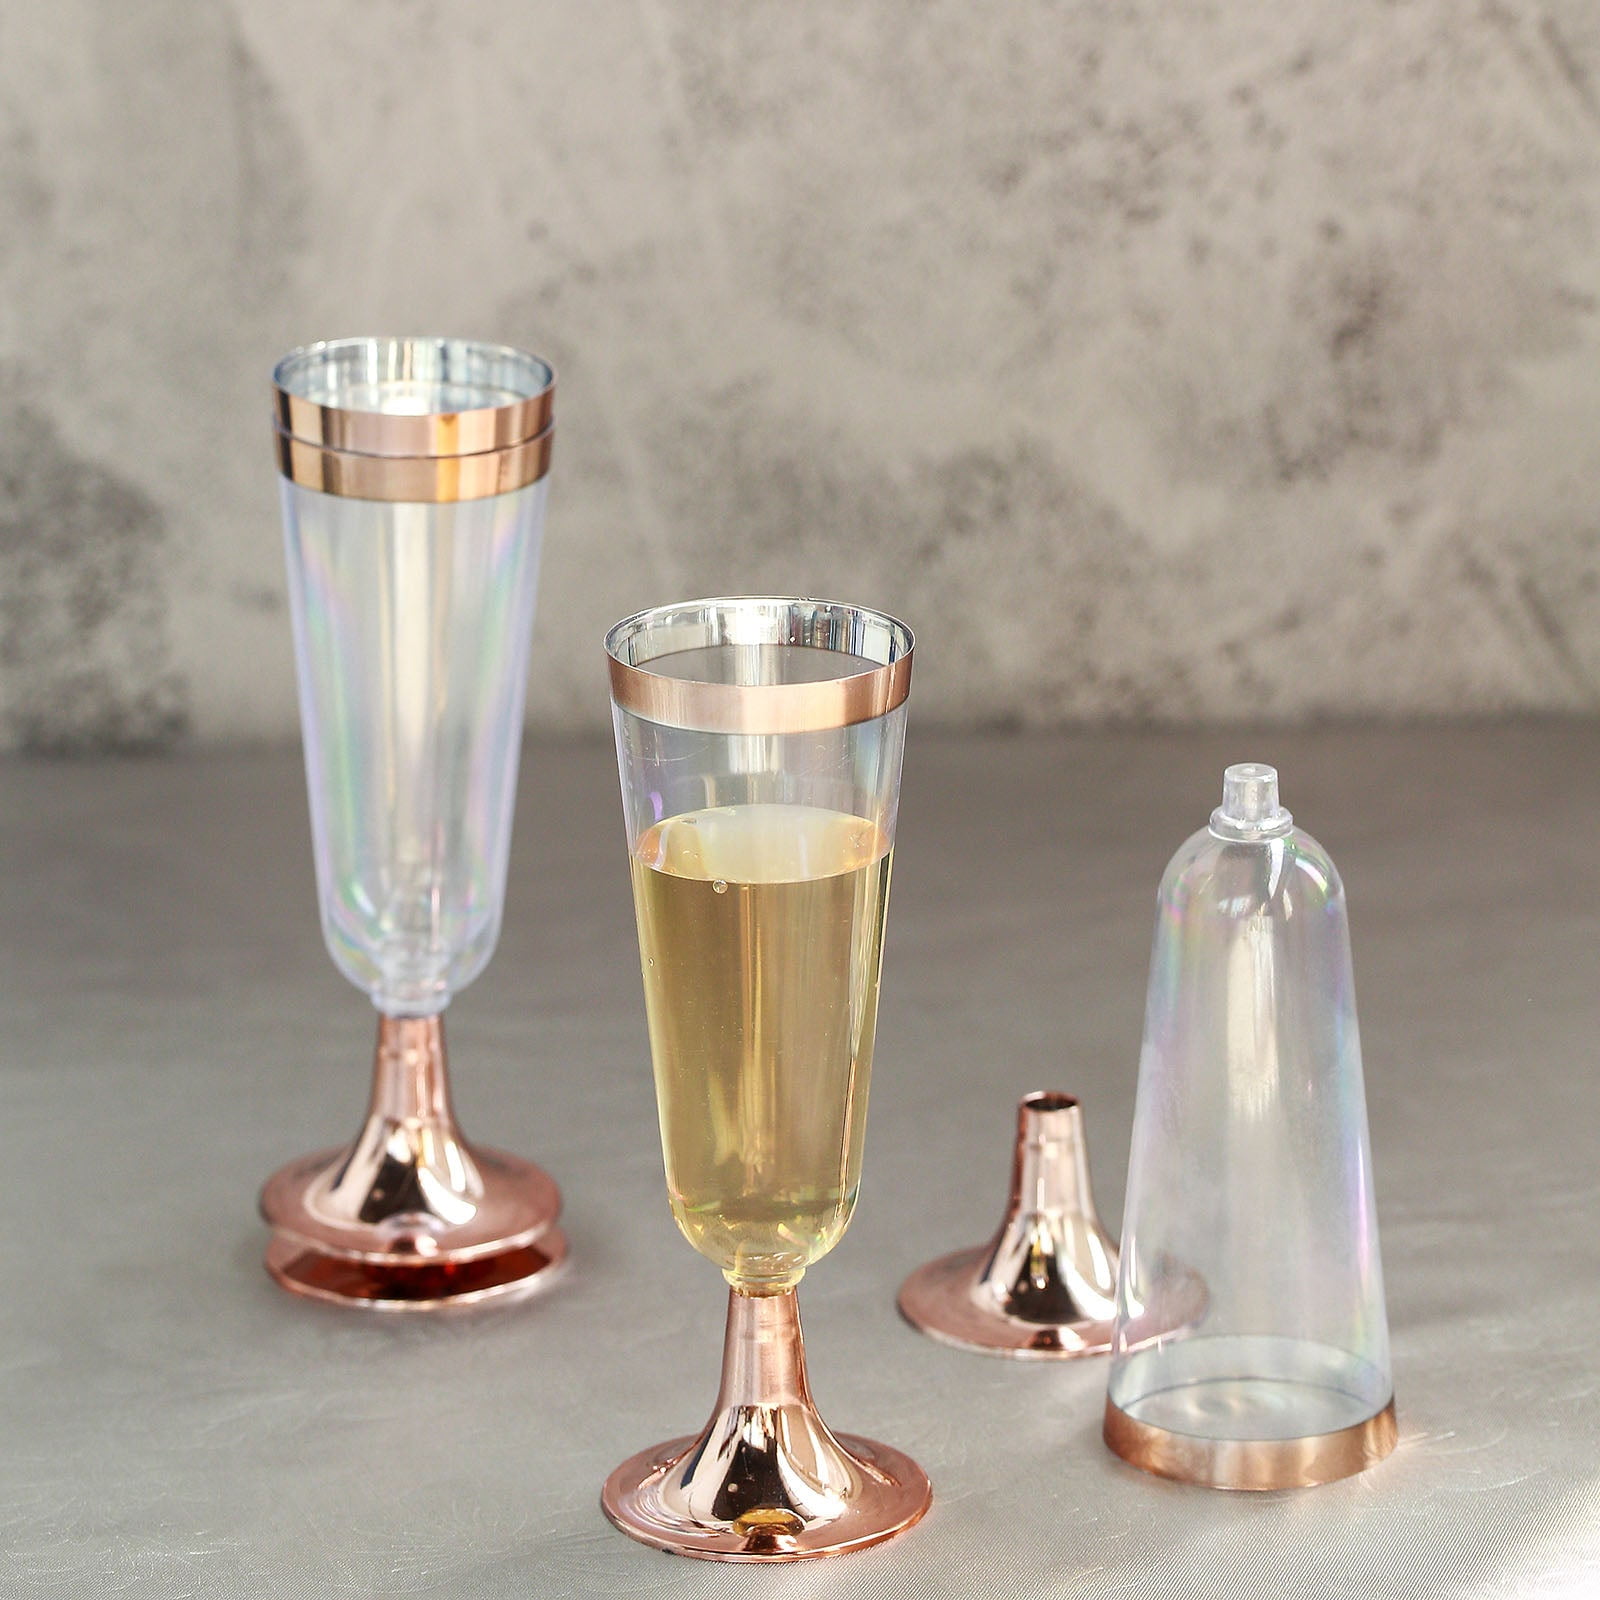 Handmade Designs 4 Unique Champagne Glasses for New Years Eve Party Decor 4 Pack Stemless Champagne Flutes 5 oz Celebration for Special Occasions 